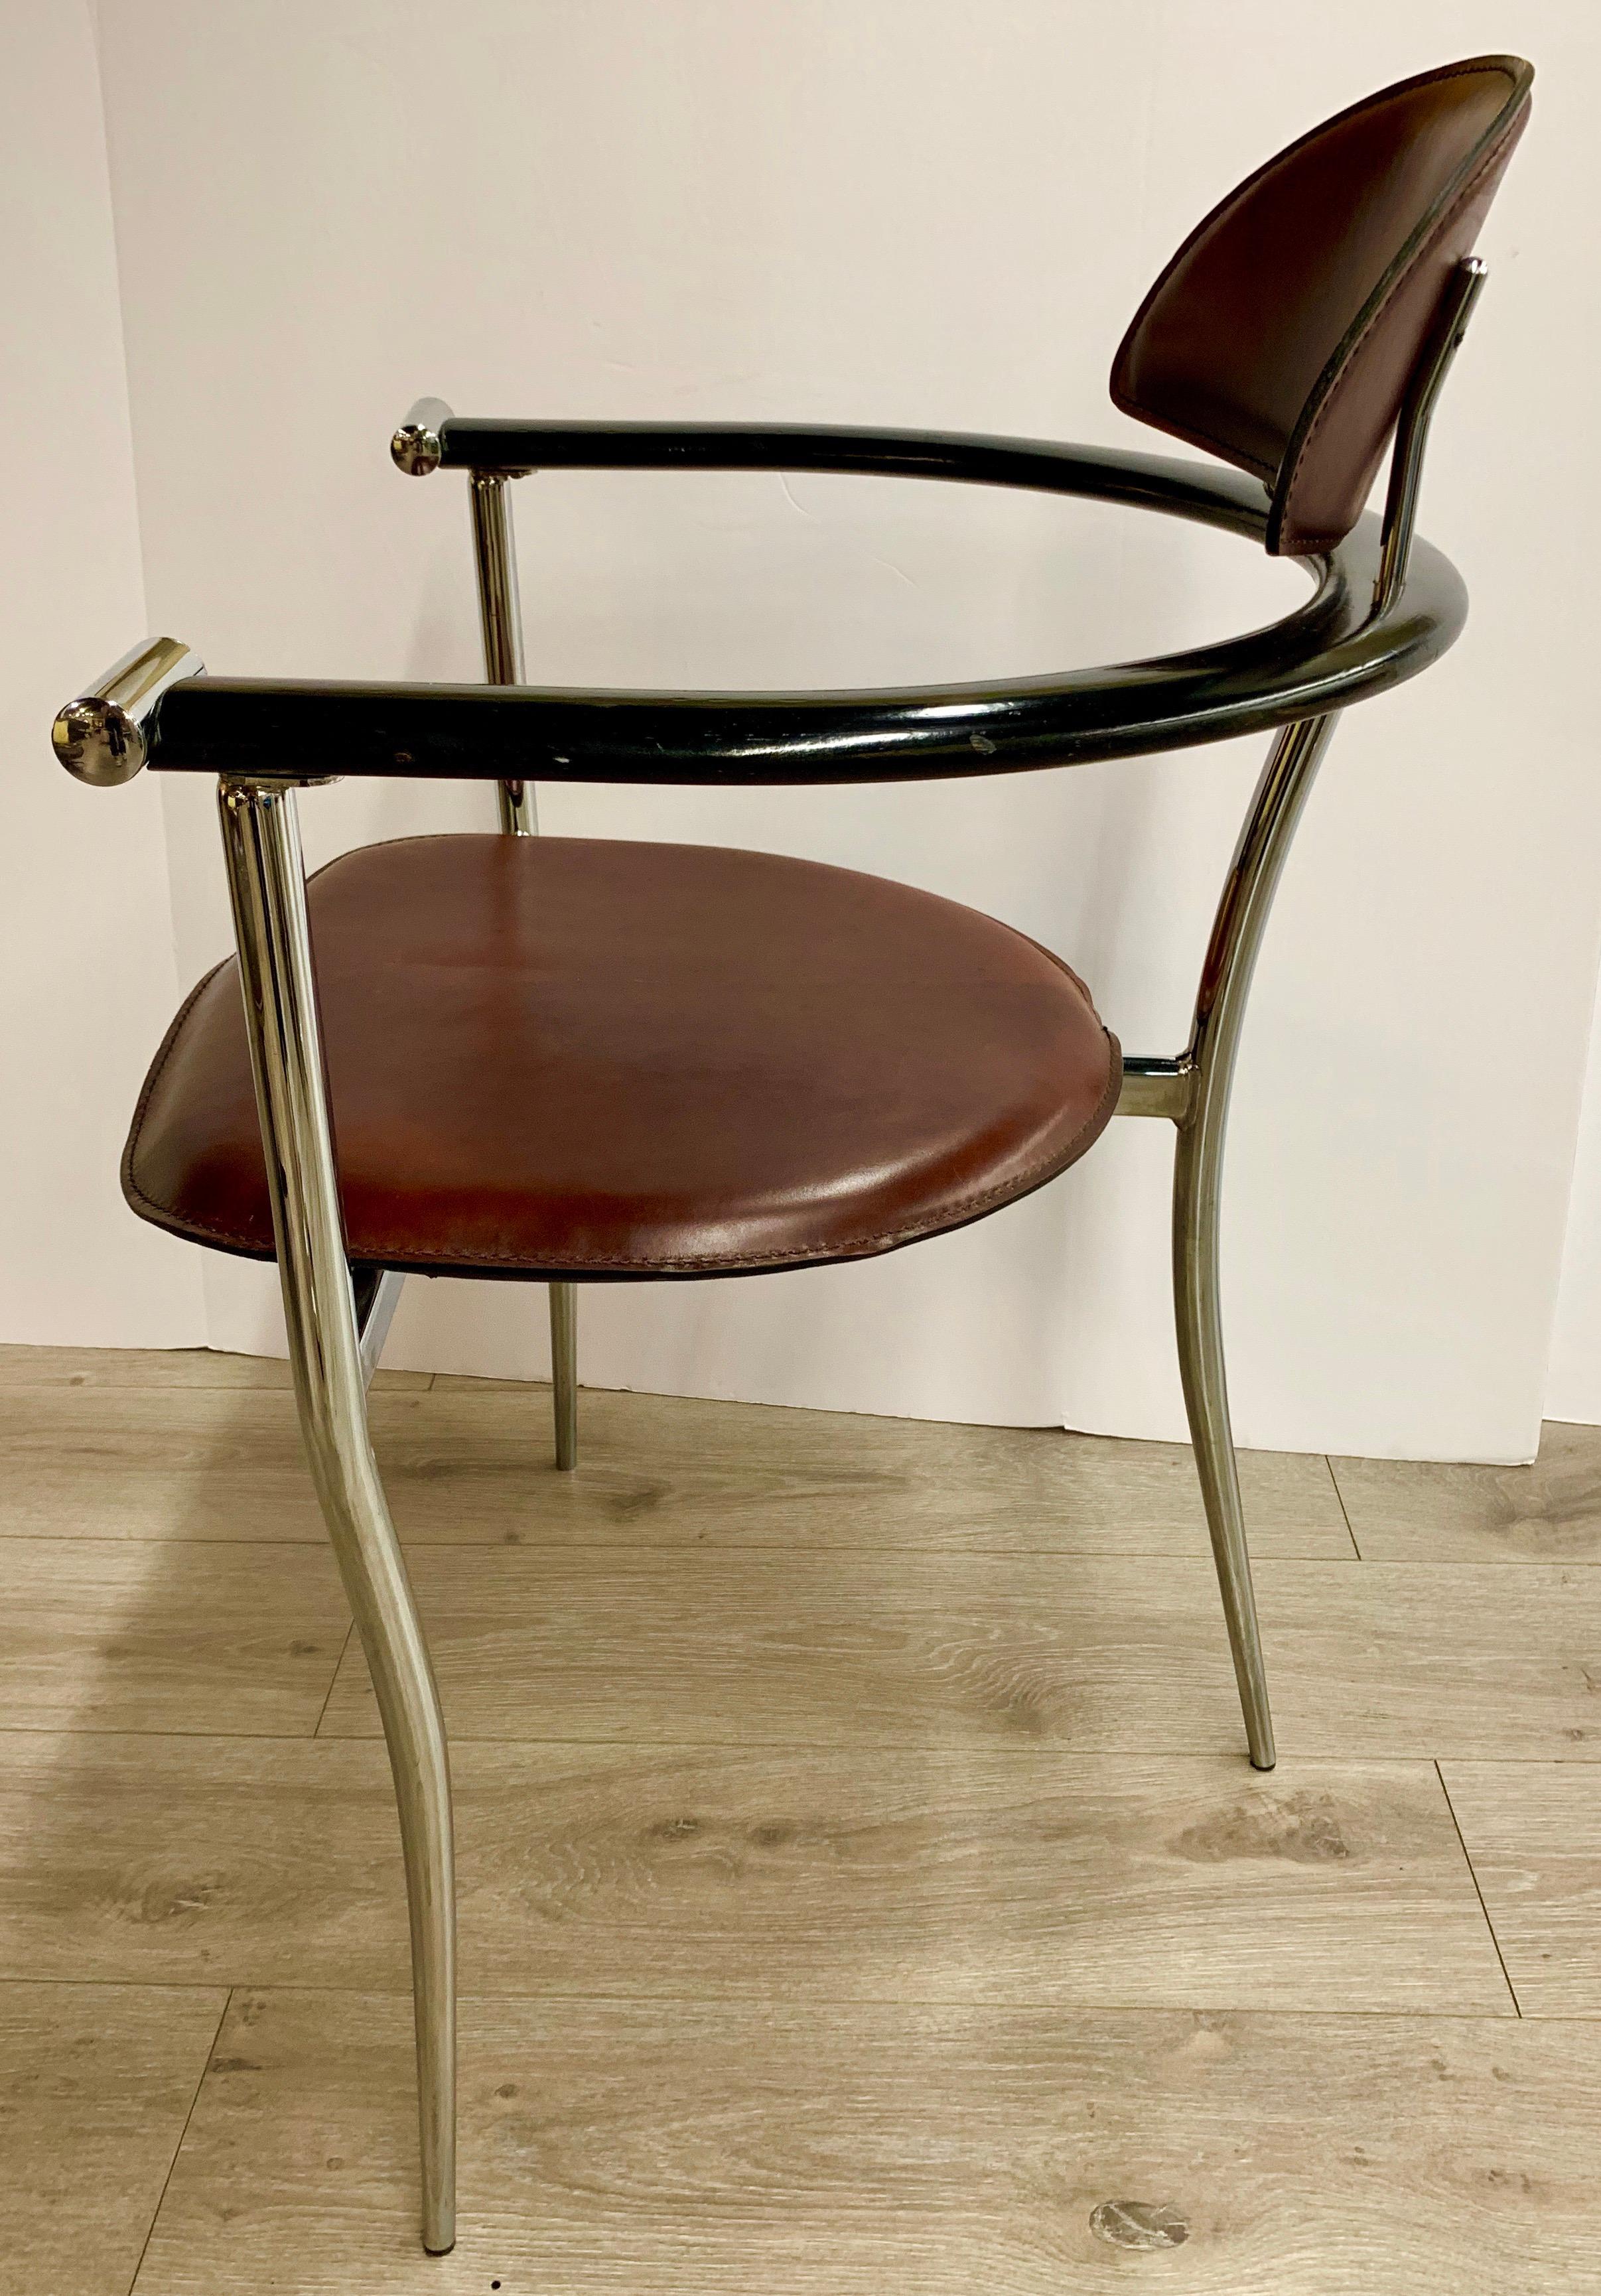 From Italy, with all hallmarks presents. These Arrben leather and chrome dining chairs come in a set of six. The have some wear and tear as shown in the pictures.